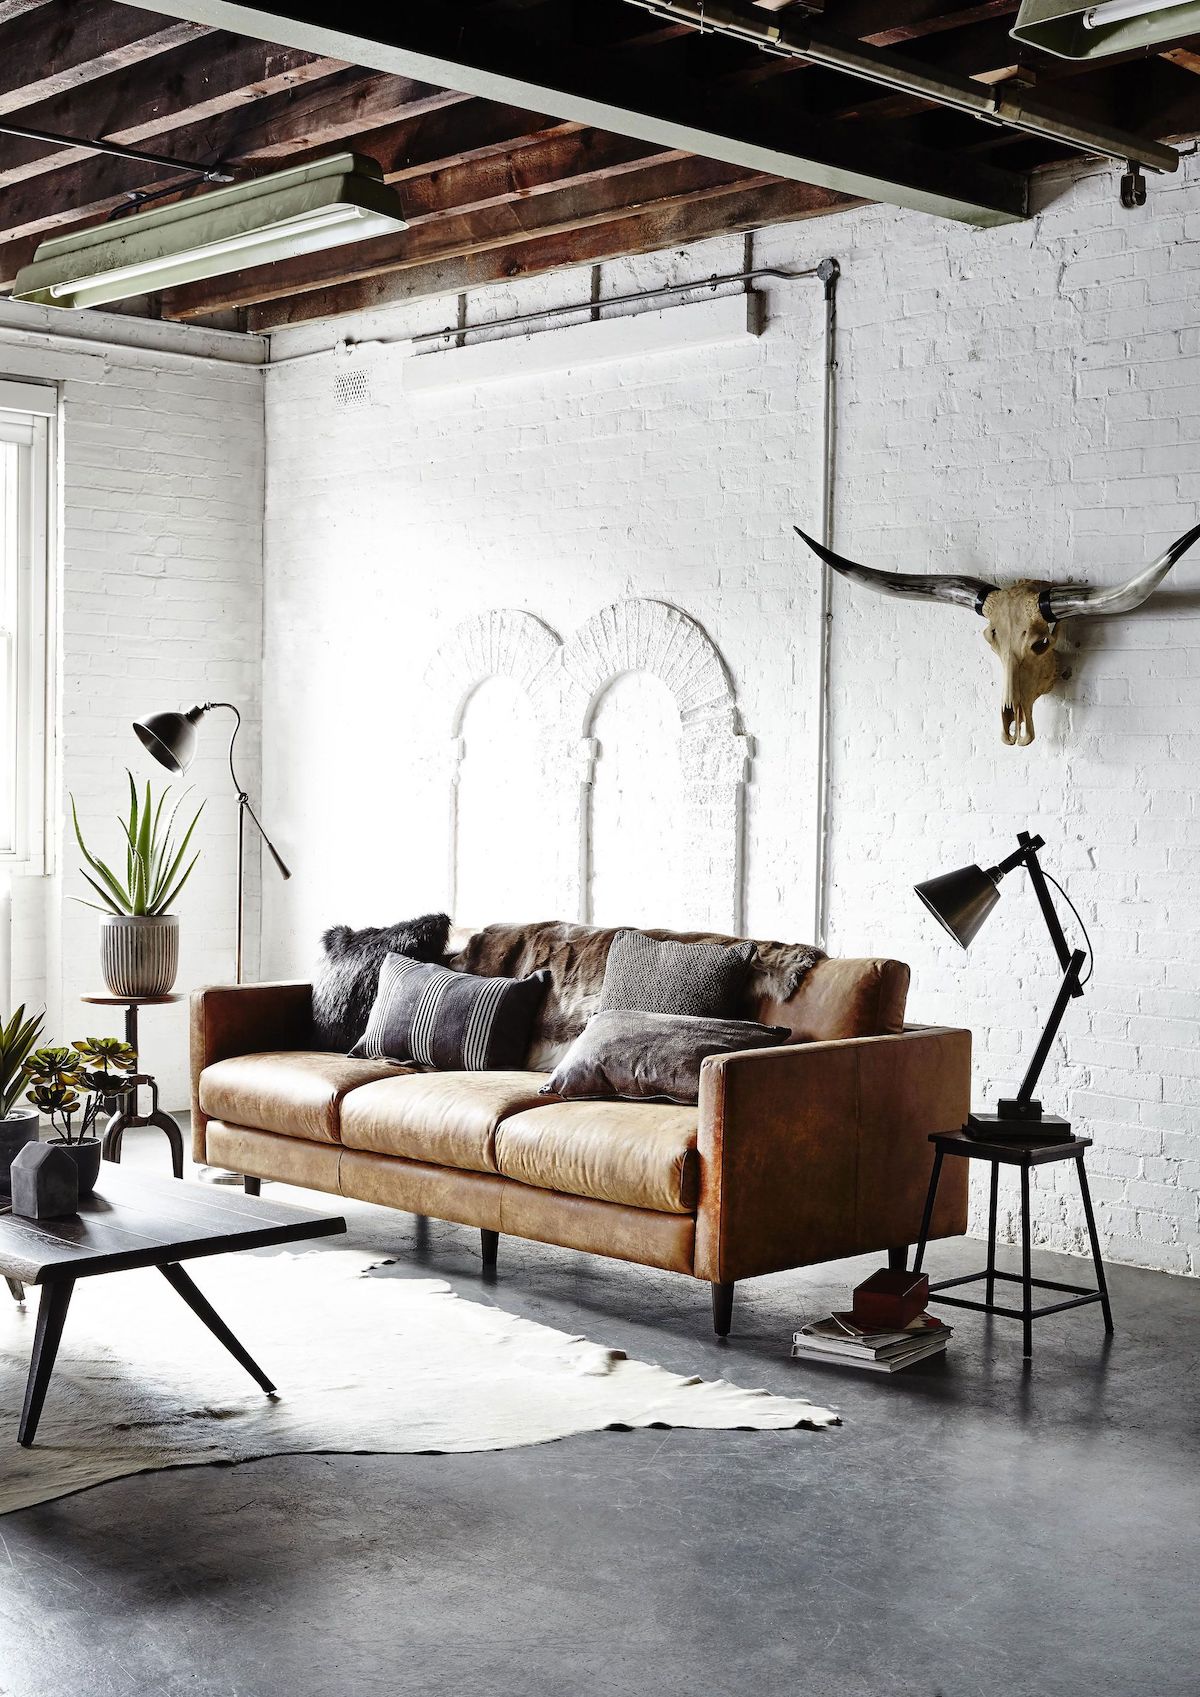 Industrial throw pillows on a brown leather couch in the living room